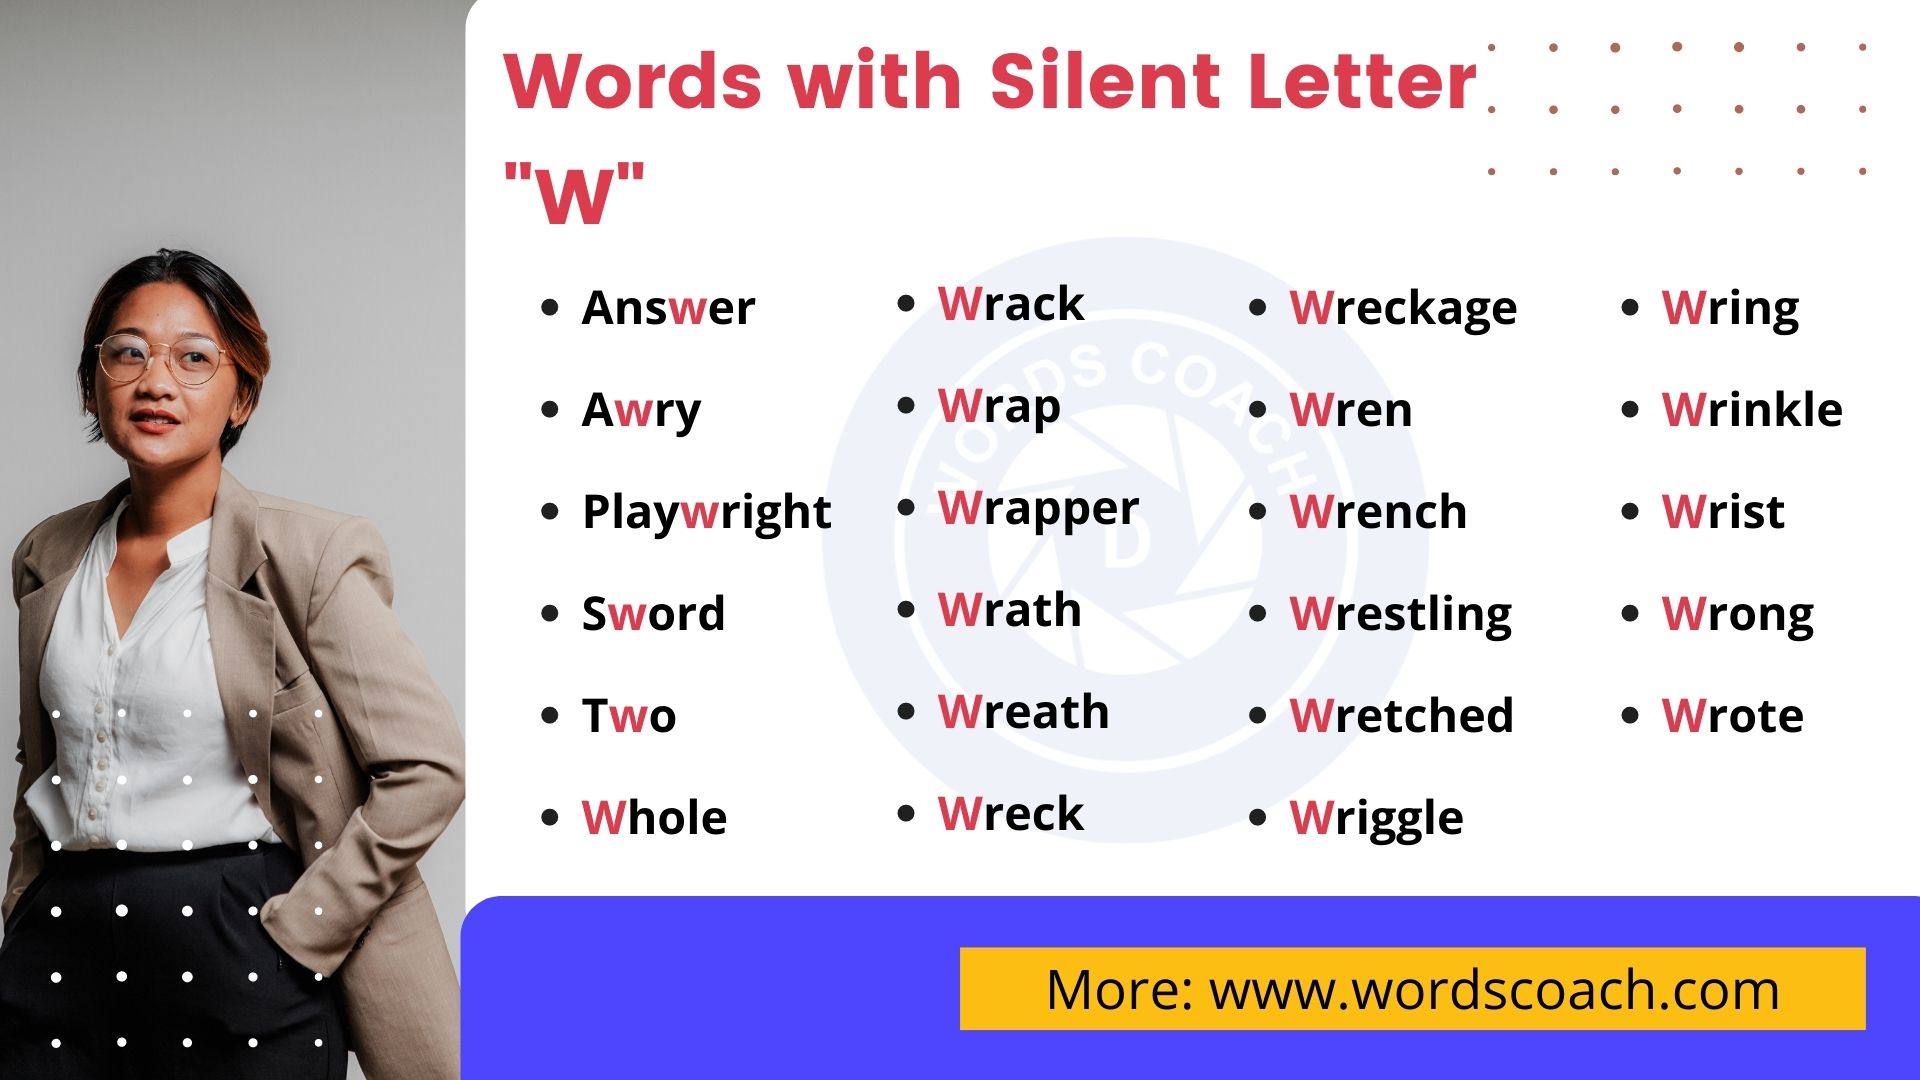 Words with Silent Letter W - wordscoach.com